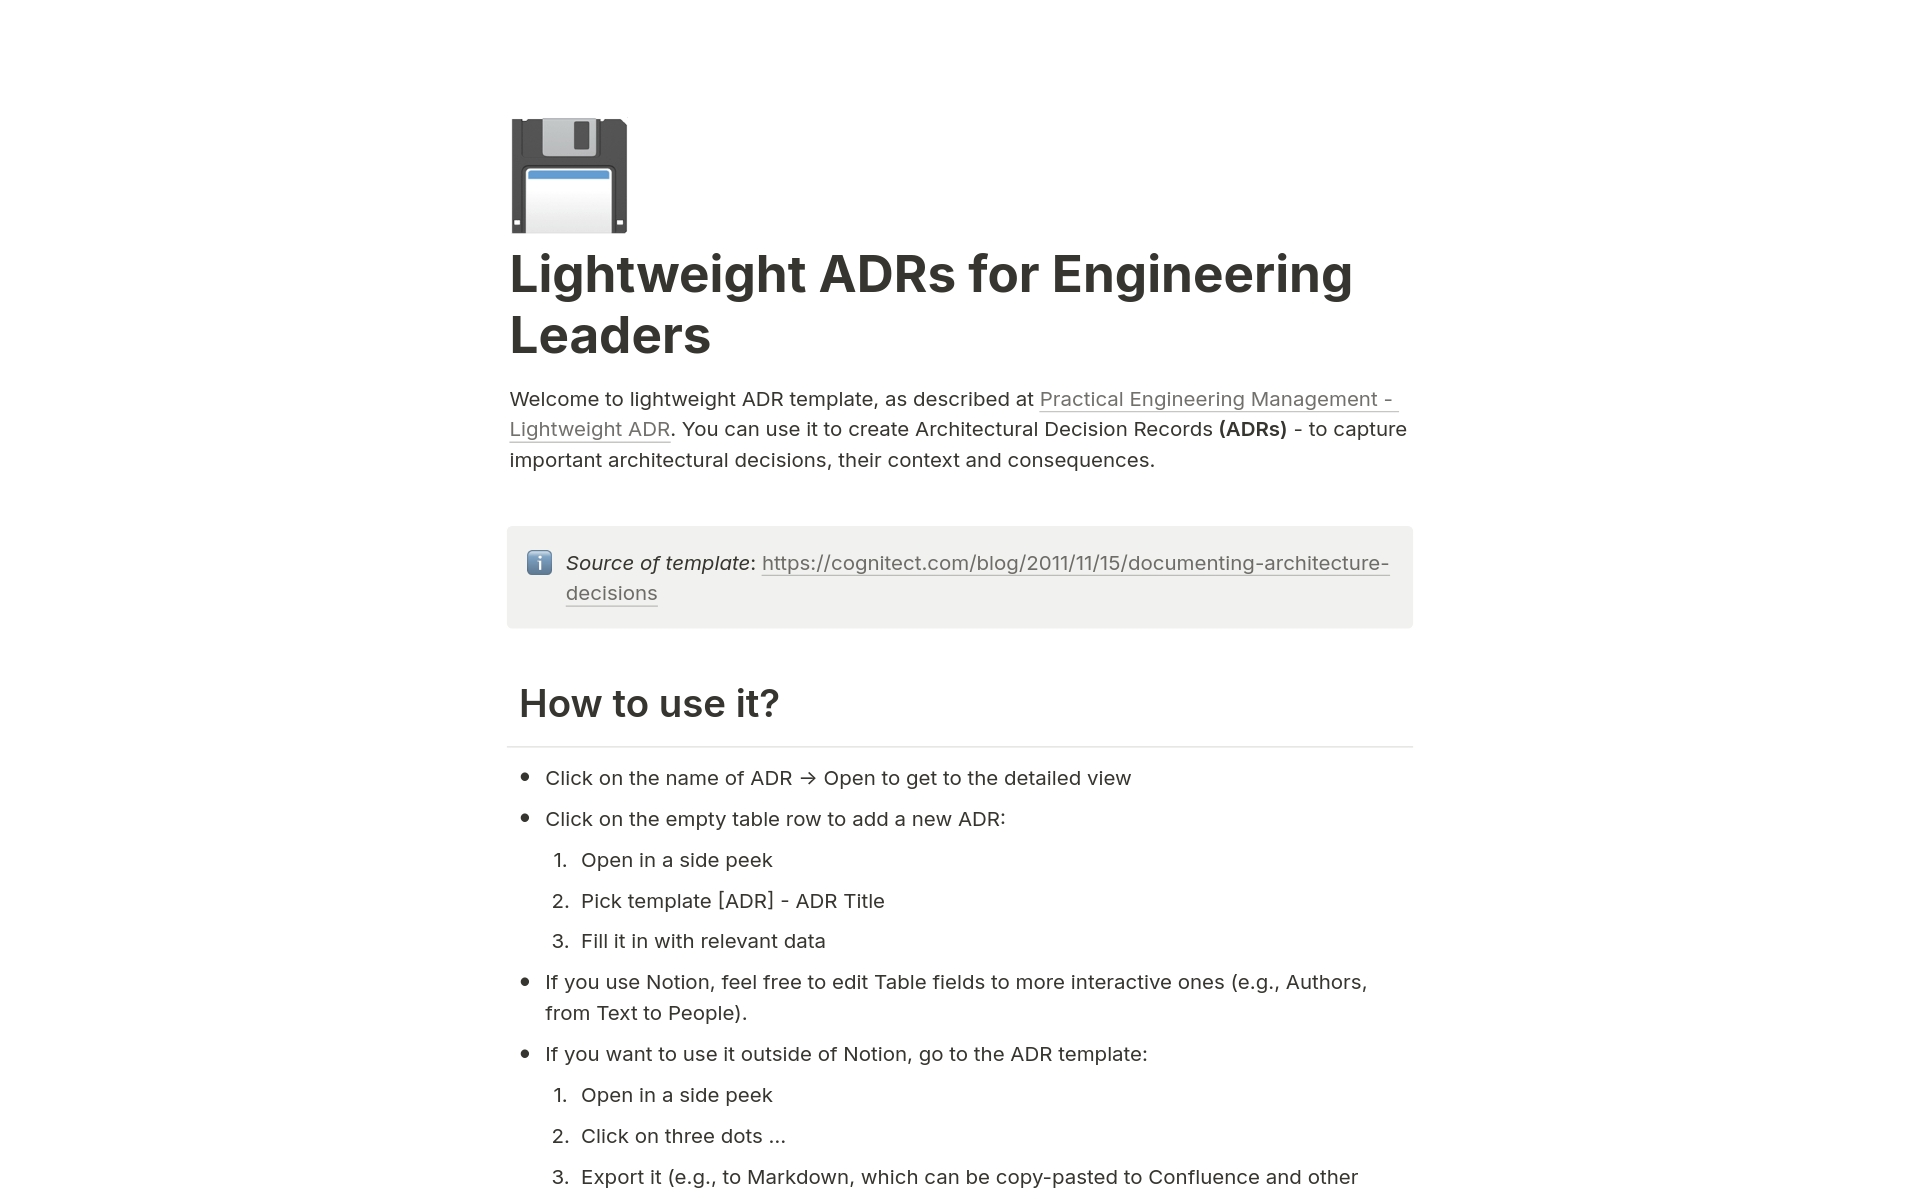 Lightweight ADR template for capturing important architectural decisions, their context, and consequences.